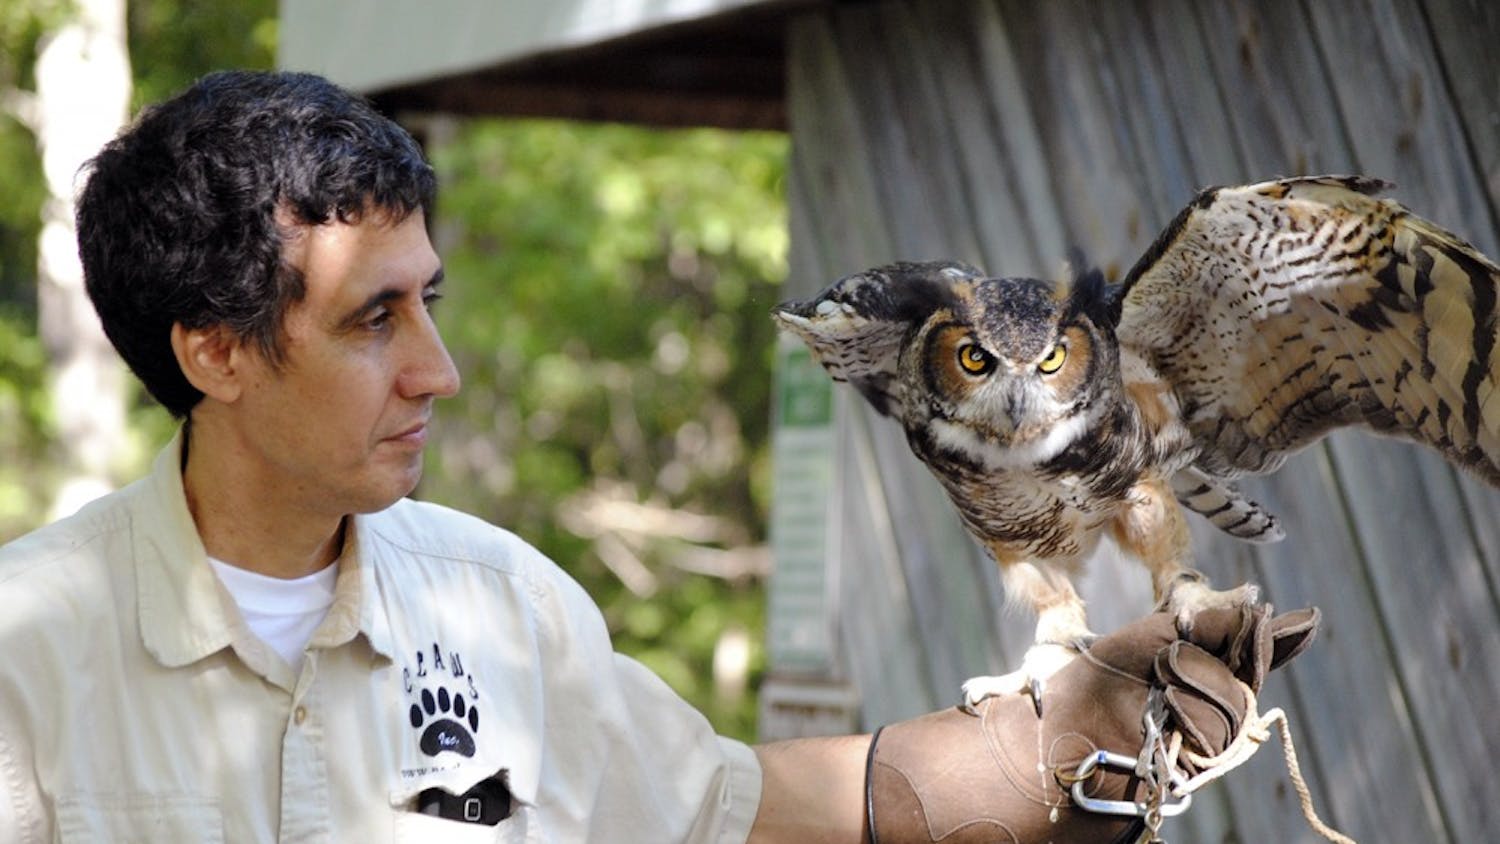 Vinny Mammone, treasurer for Claws Inc., holds one of the organization's permanent residents Khalitra, a great horned owl who is blind in one eye.